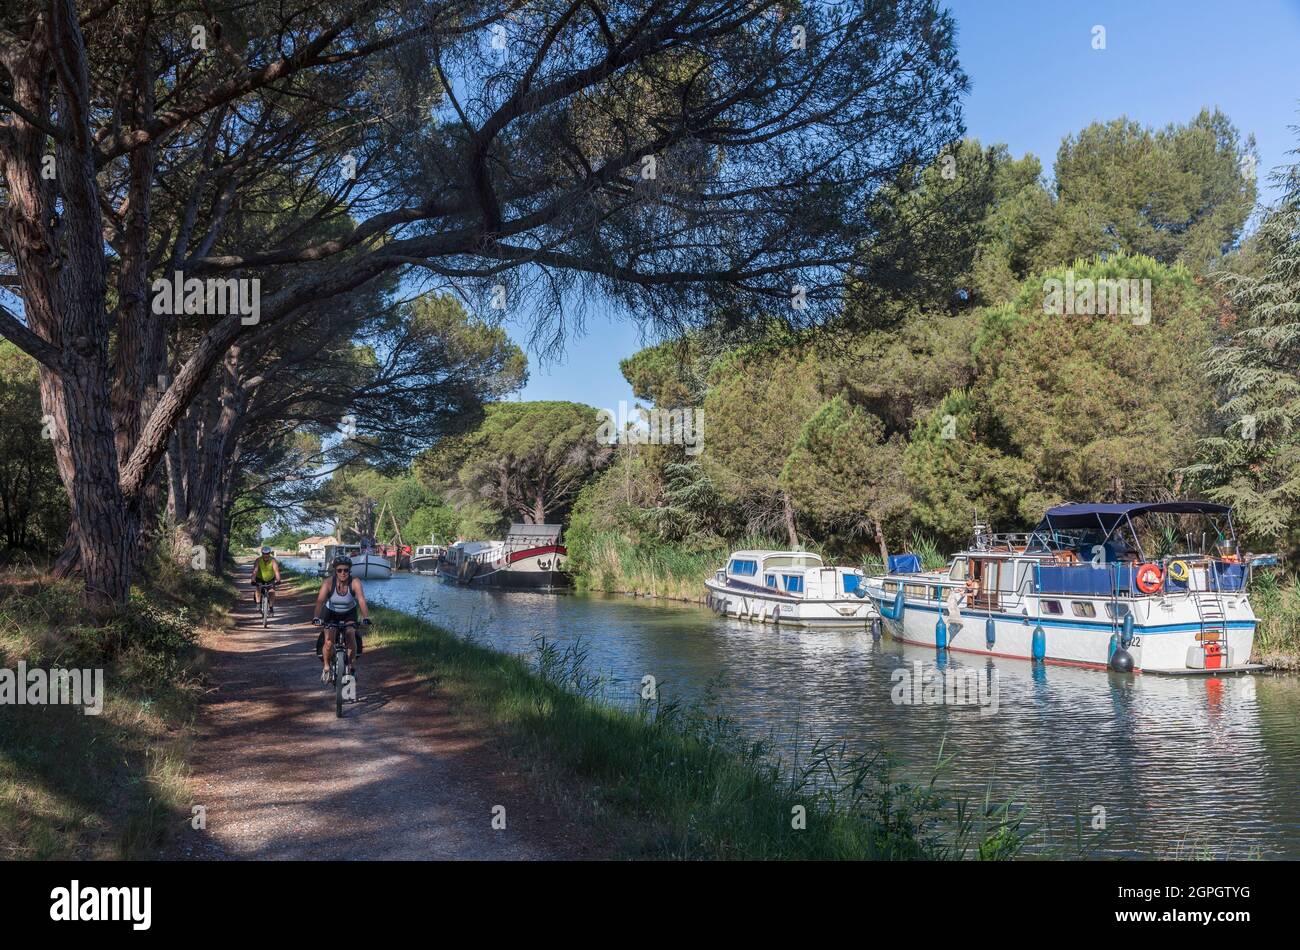 France, Aude, Salleles d'Aude, the Canal du Midi listed as World Heritage by Unesco, cyclists on the towpath Stock Photo